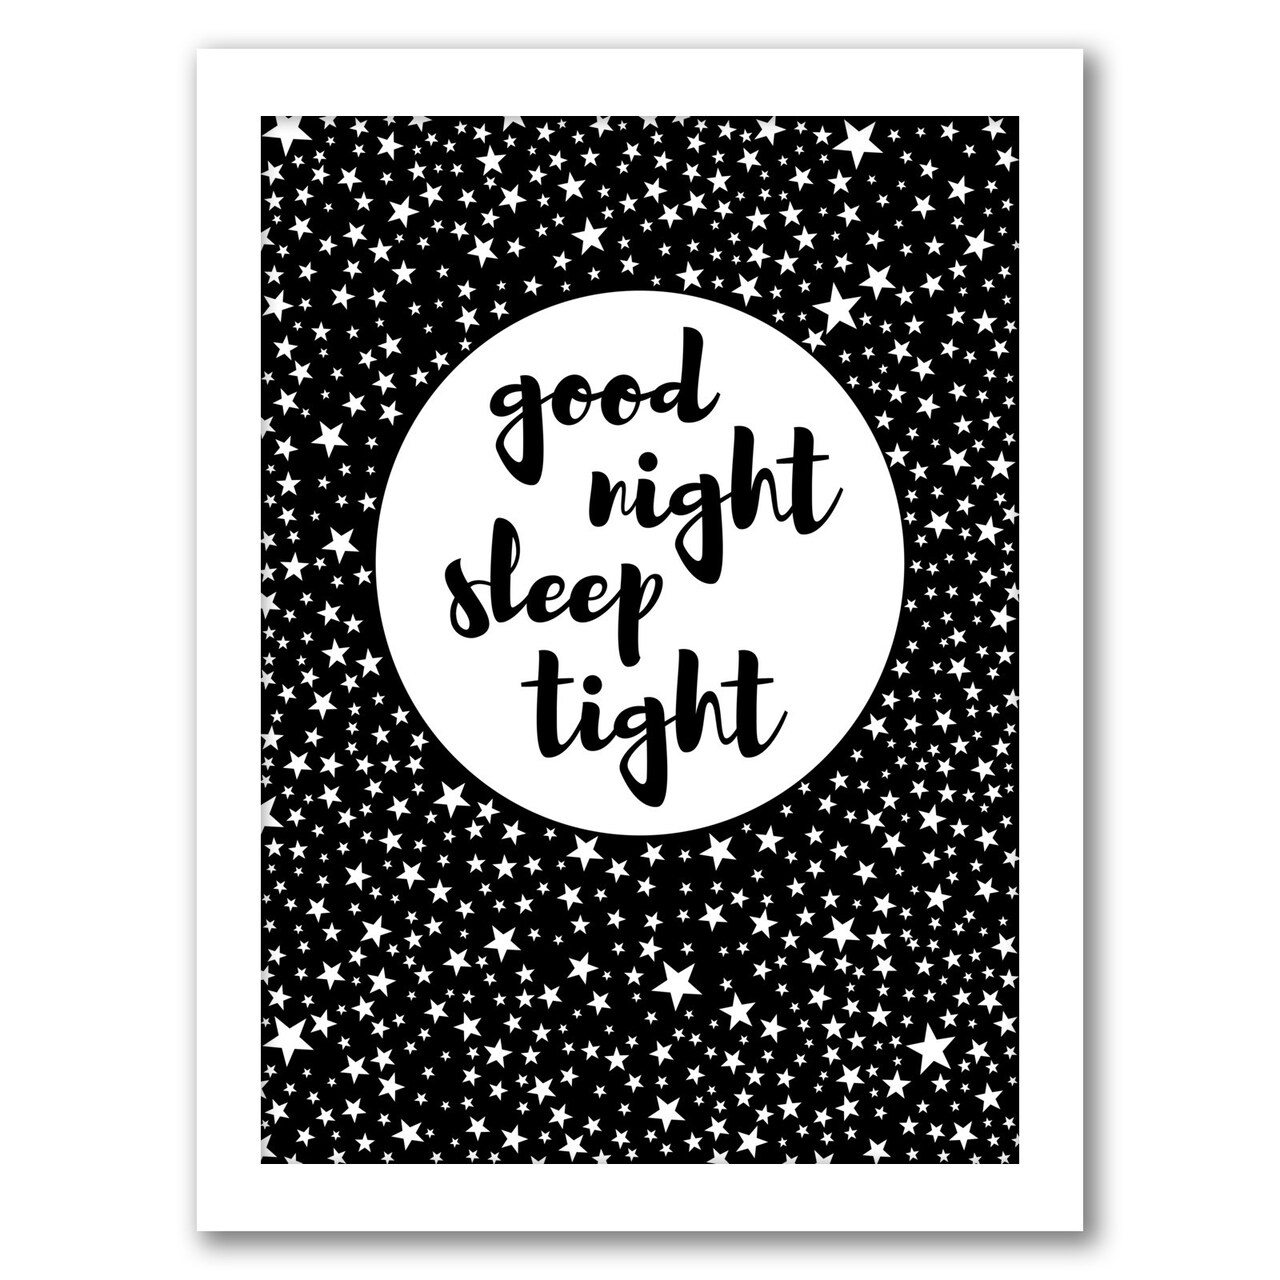 Goodnight by Nanamia Design Frame  - Americanflat